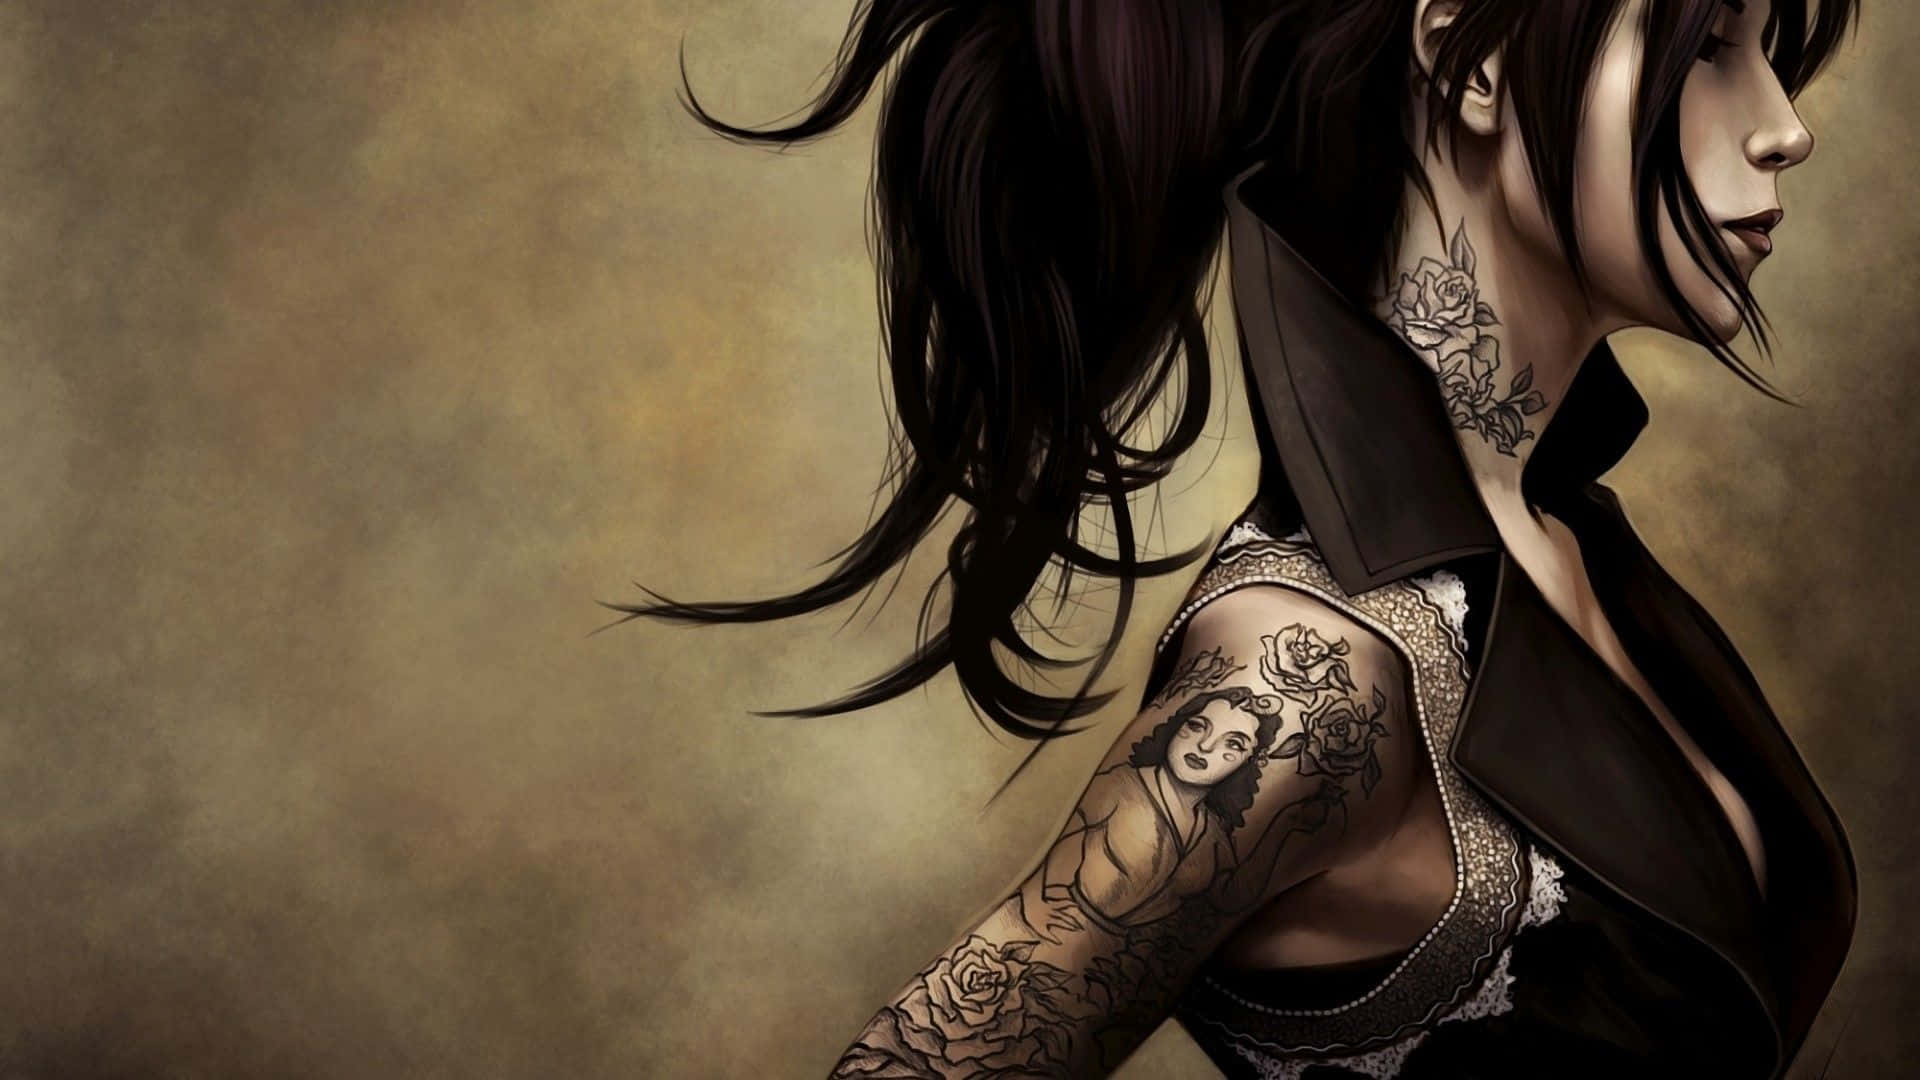 Embrace Your Identity By Crafting Eye-Catching Tattoos